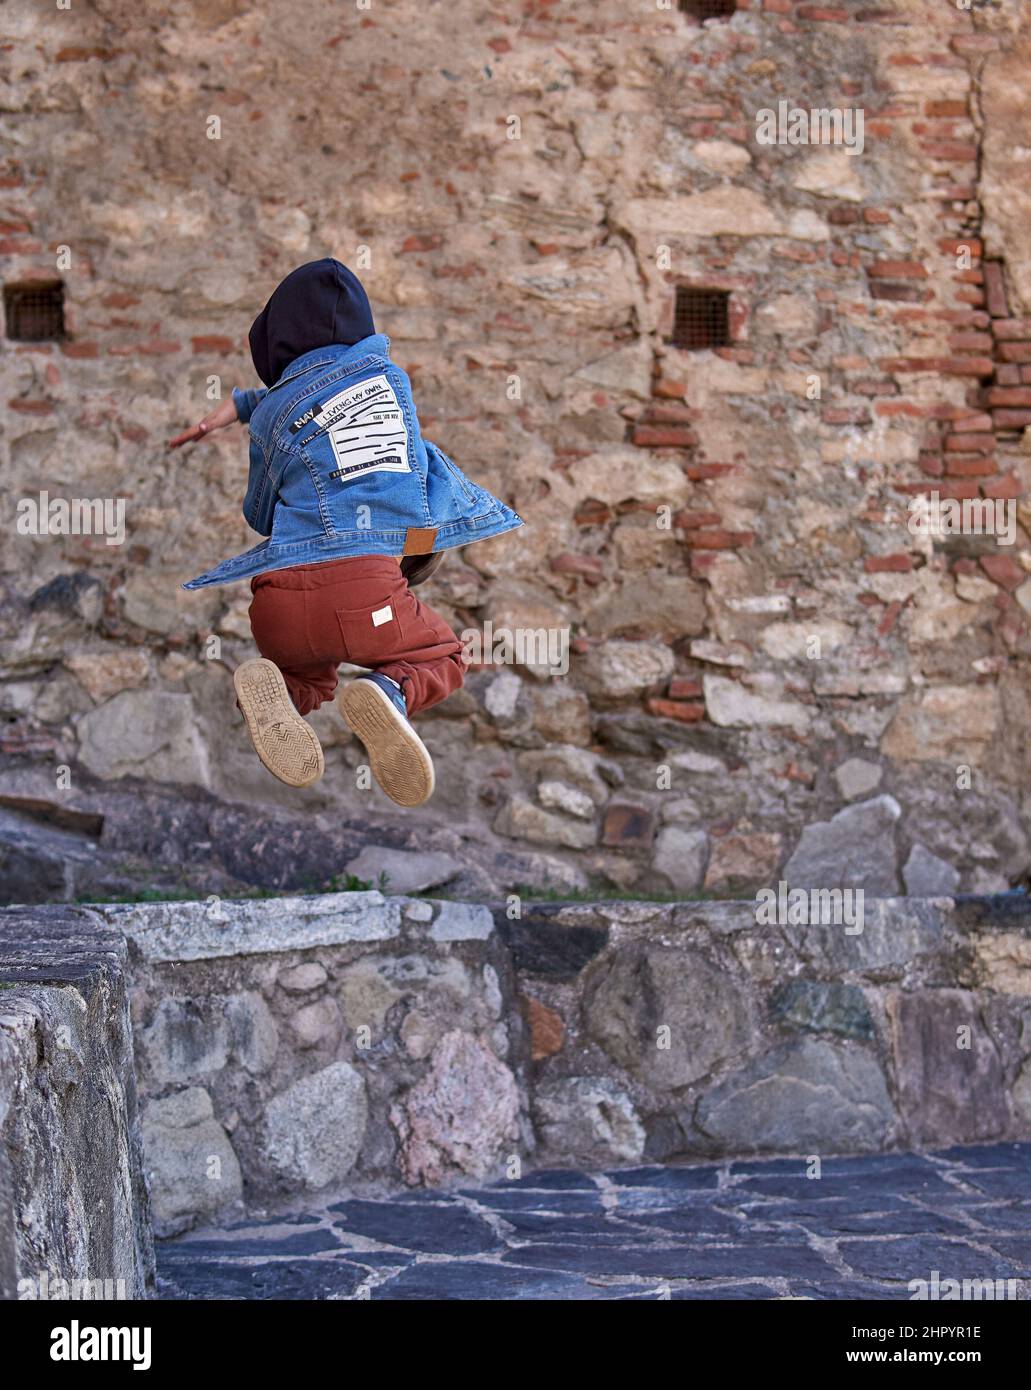 boy Child Practicing Parkour Gymnastics Outside on ancient town. kid on his back in a hooded jean jacket pirouetting on air. Vertical Stock Photo